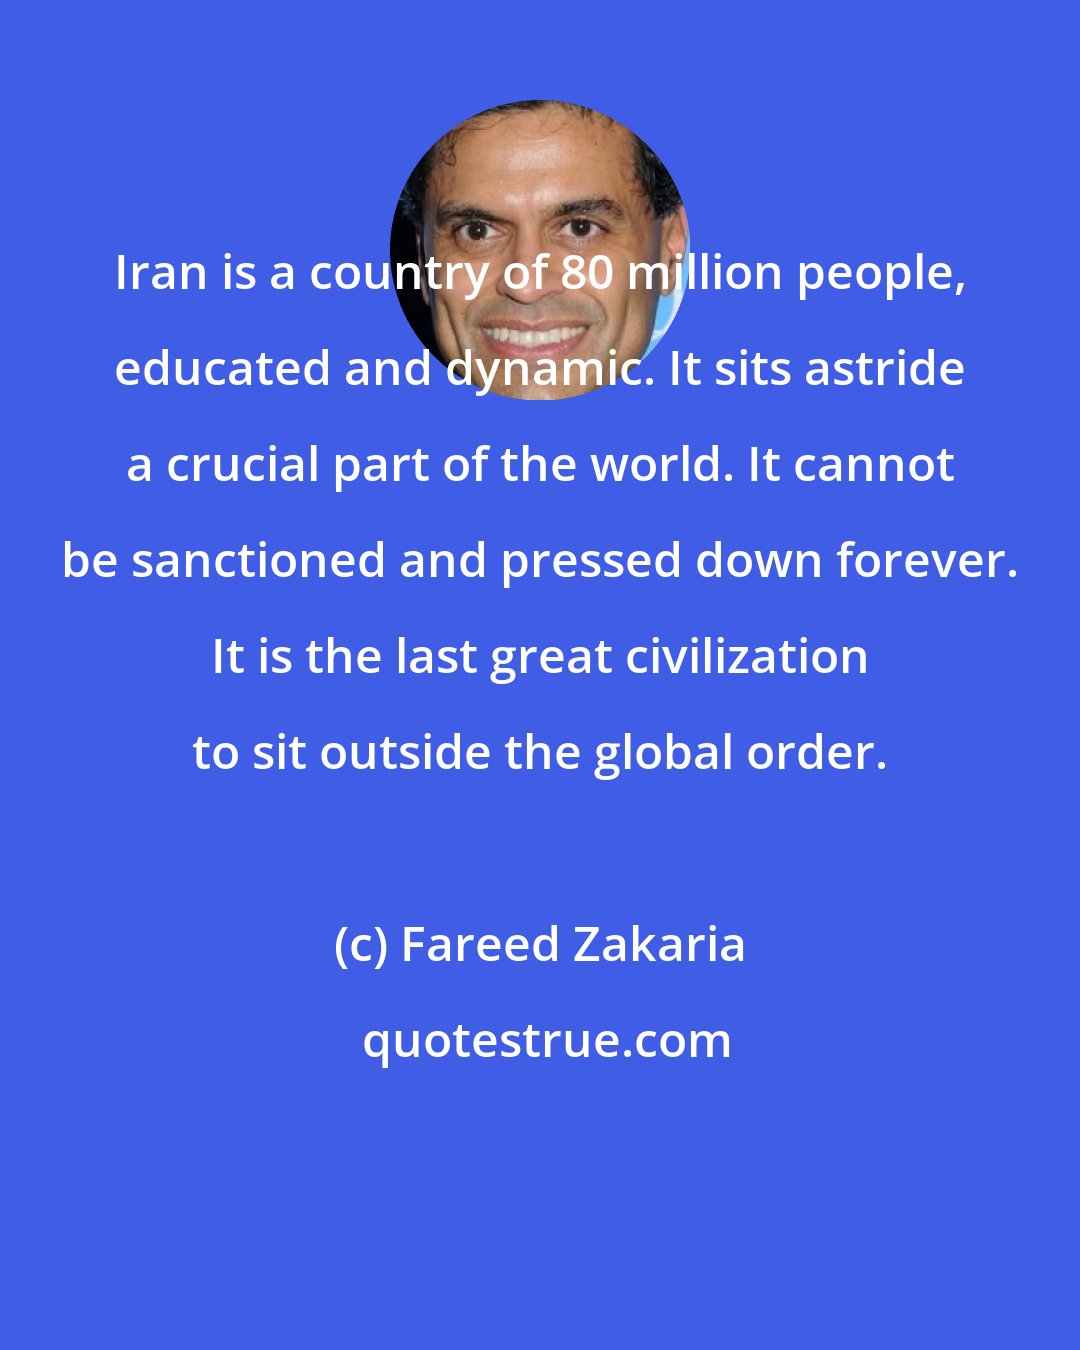 Fareed Zakaria: Iran is a country of 80 million people, educated and dynamic. It sits astride a crucial part of the world. It cannot be sanctioned and pressed down forever. It is the last great civilization to sit outside the global order.